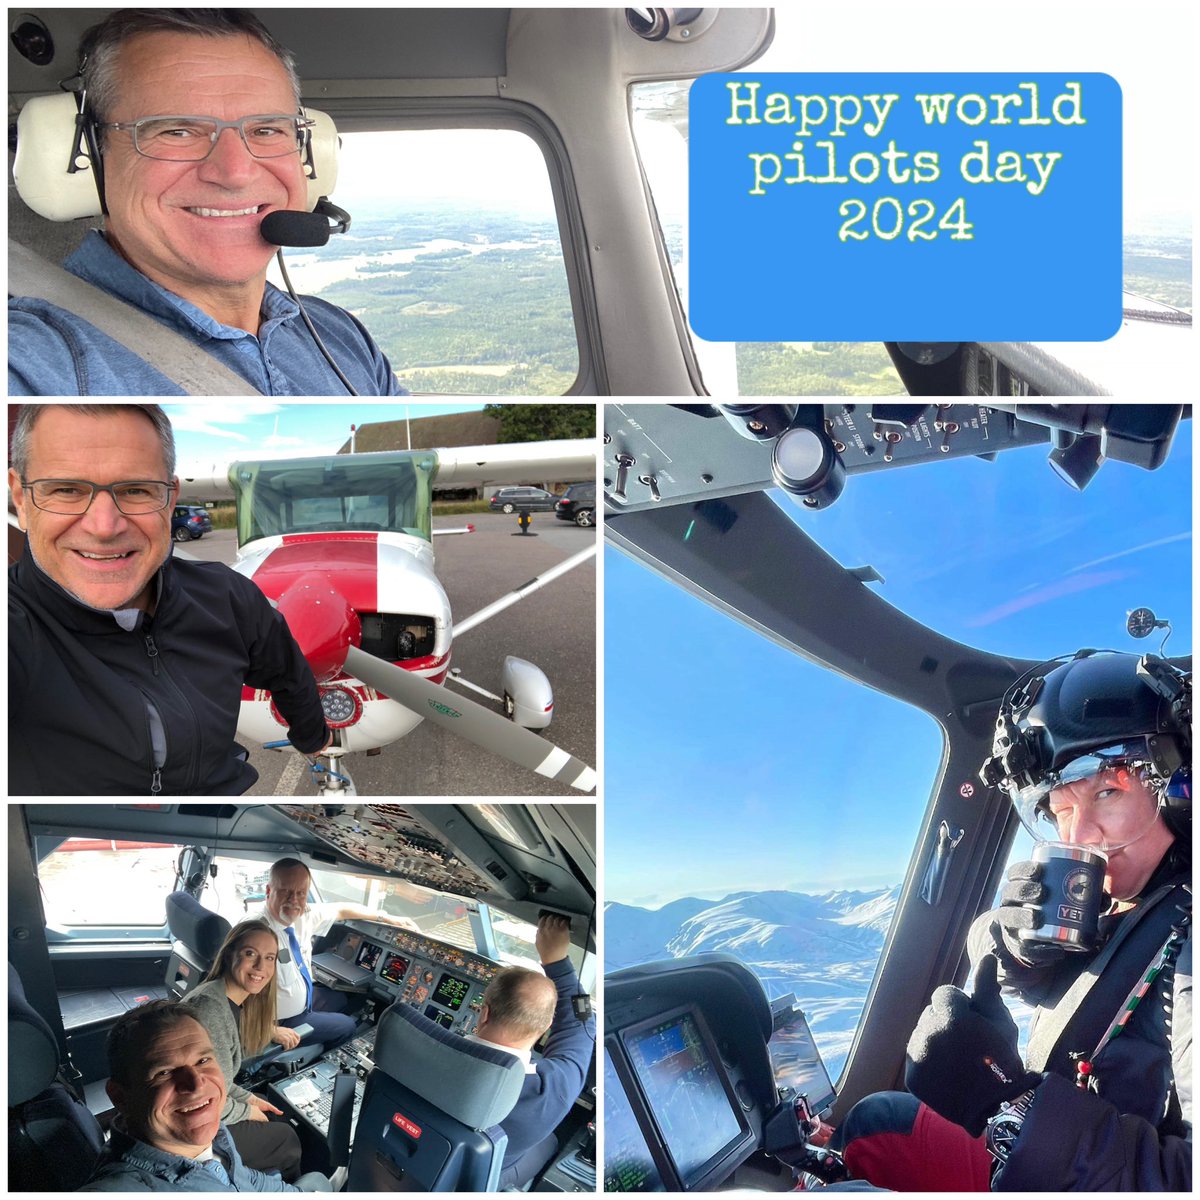 It’s world pilots day! The role of pilots, including commercial pilots, flight instructors, private flight crew, fighter jet pilots and recreational pilots, is recognized during International Pilots’ Day, which takes place April 26. @Transportft Flyg @eha_heli